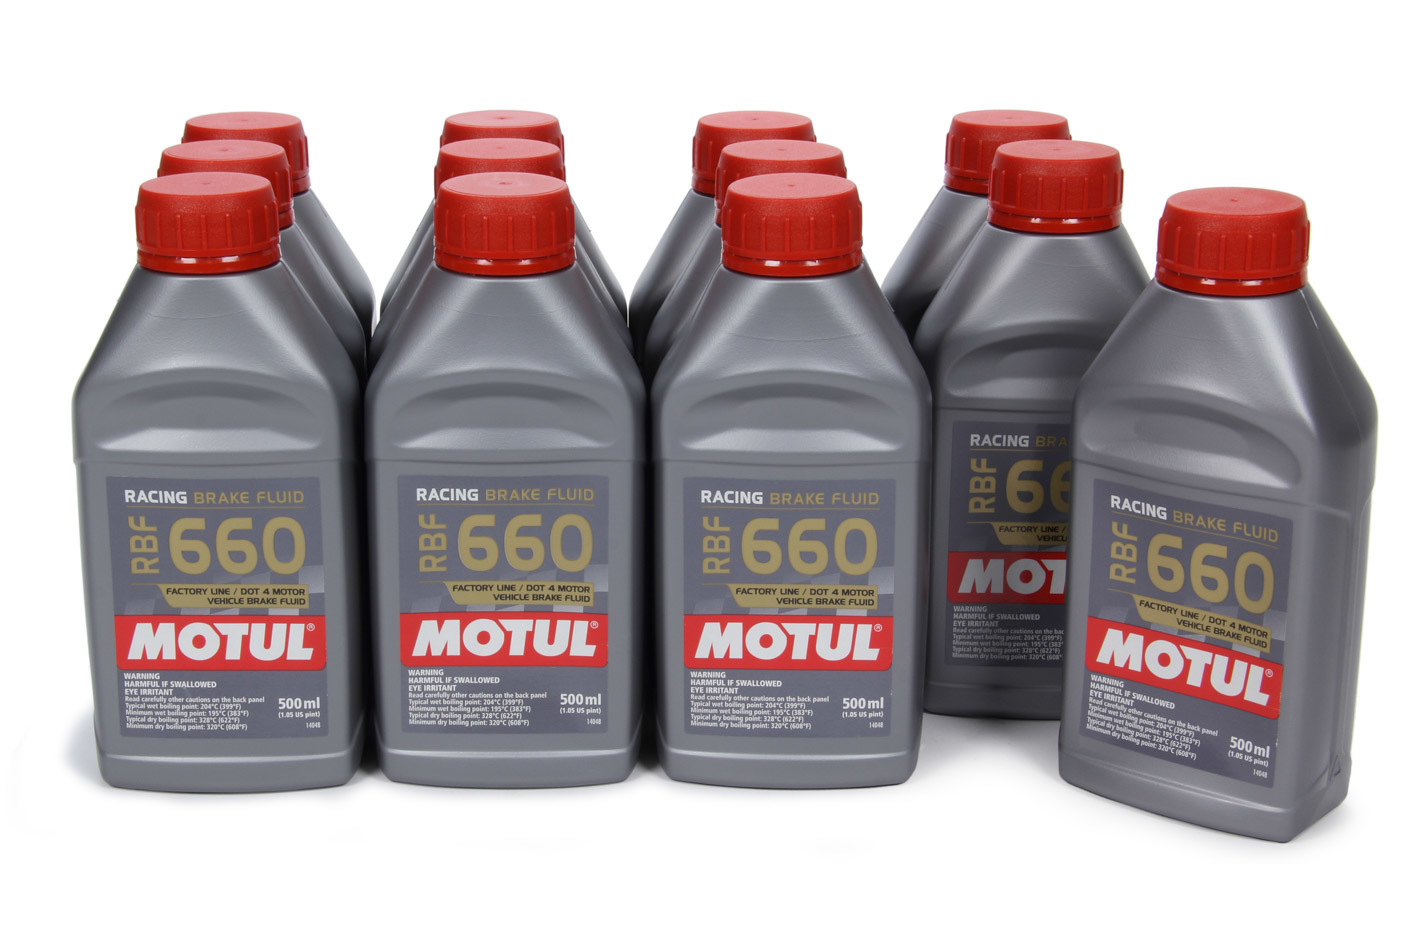 Racing Brake Fluid Motul RBF660 Corvette and Others, Factory Line, DOT 4, Synthetic, 500 ml, Set of 12